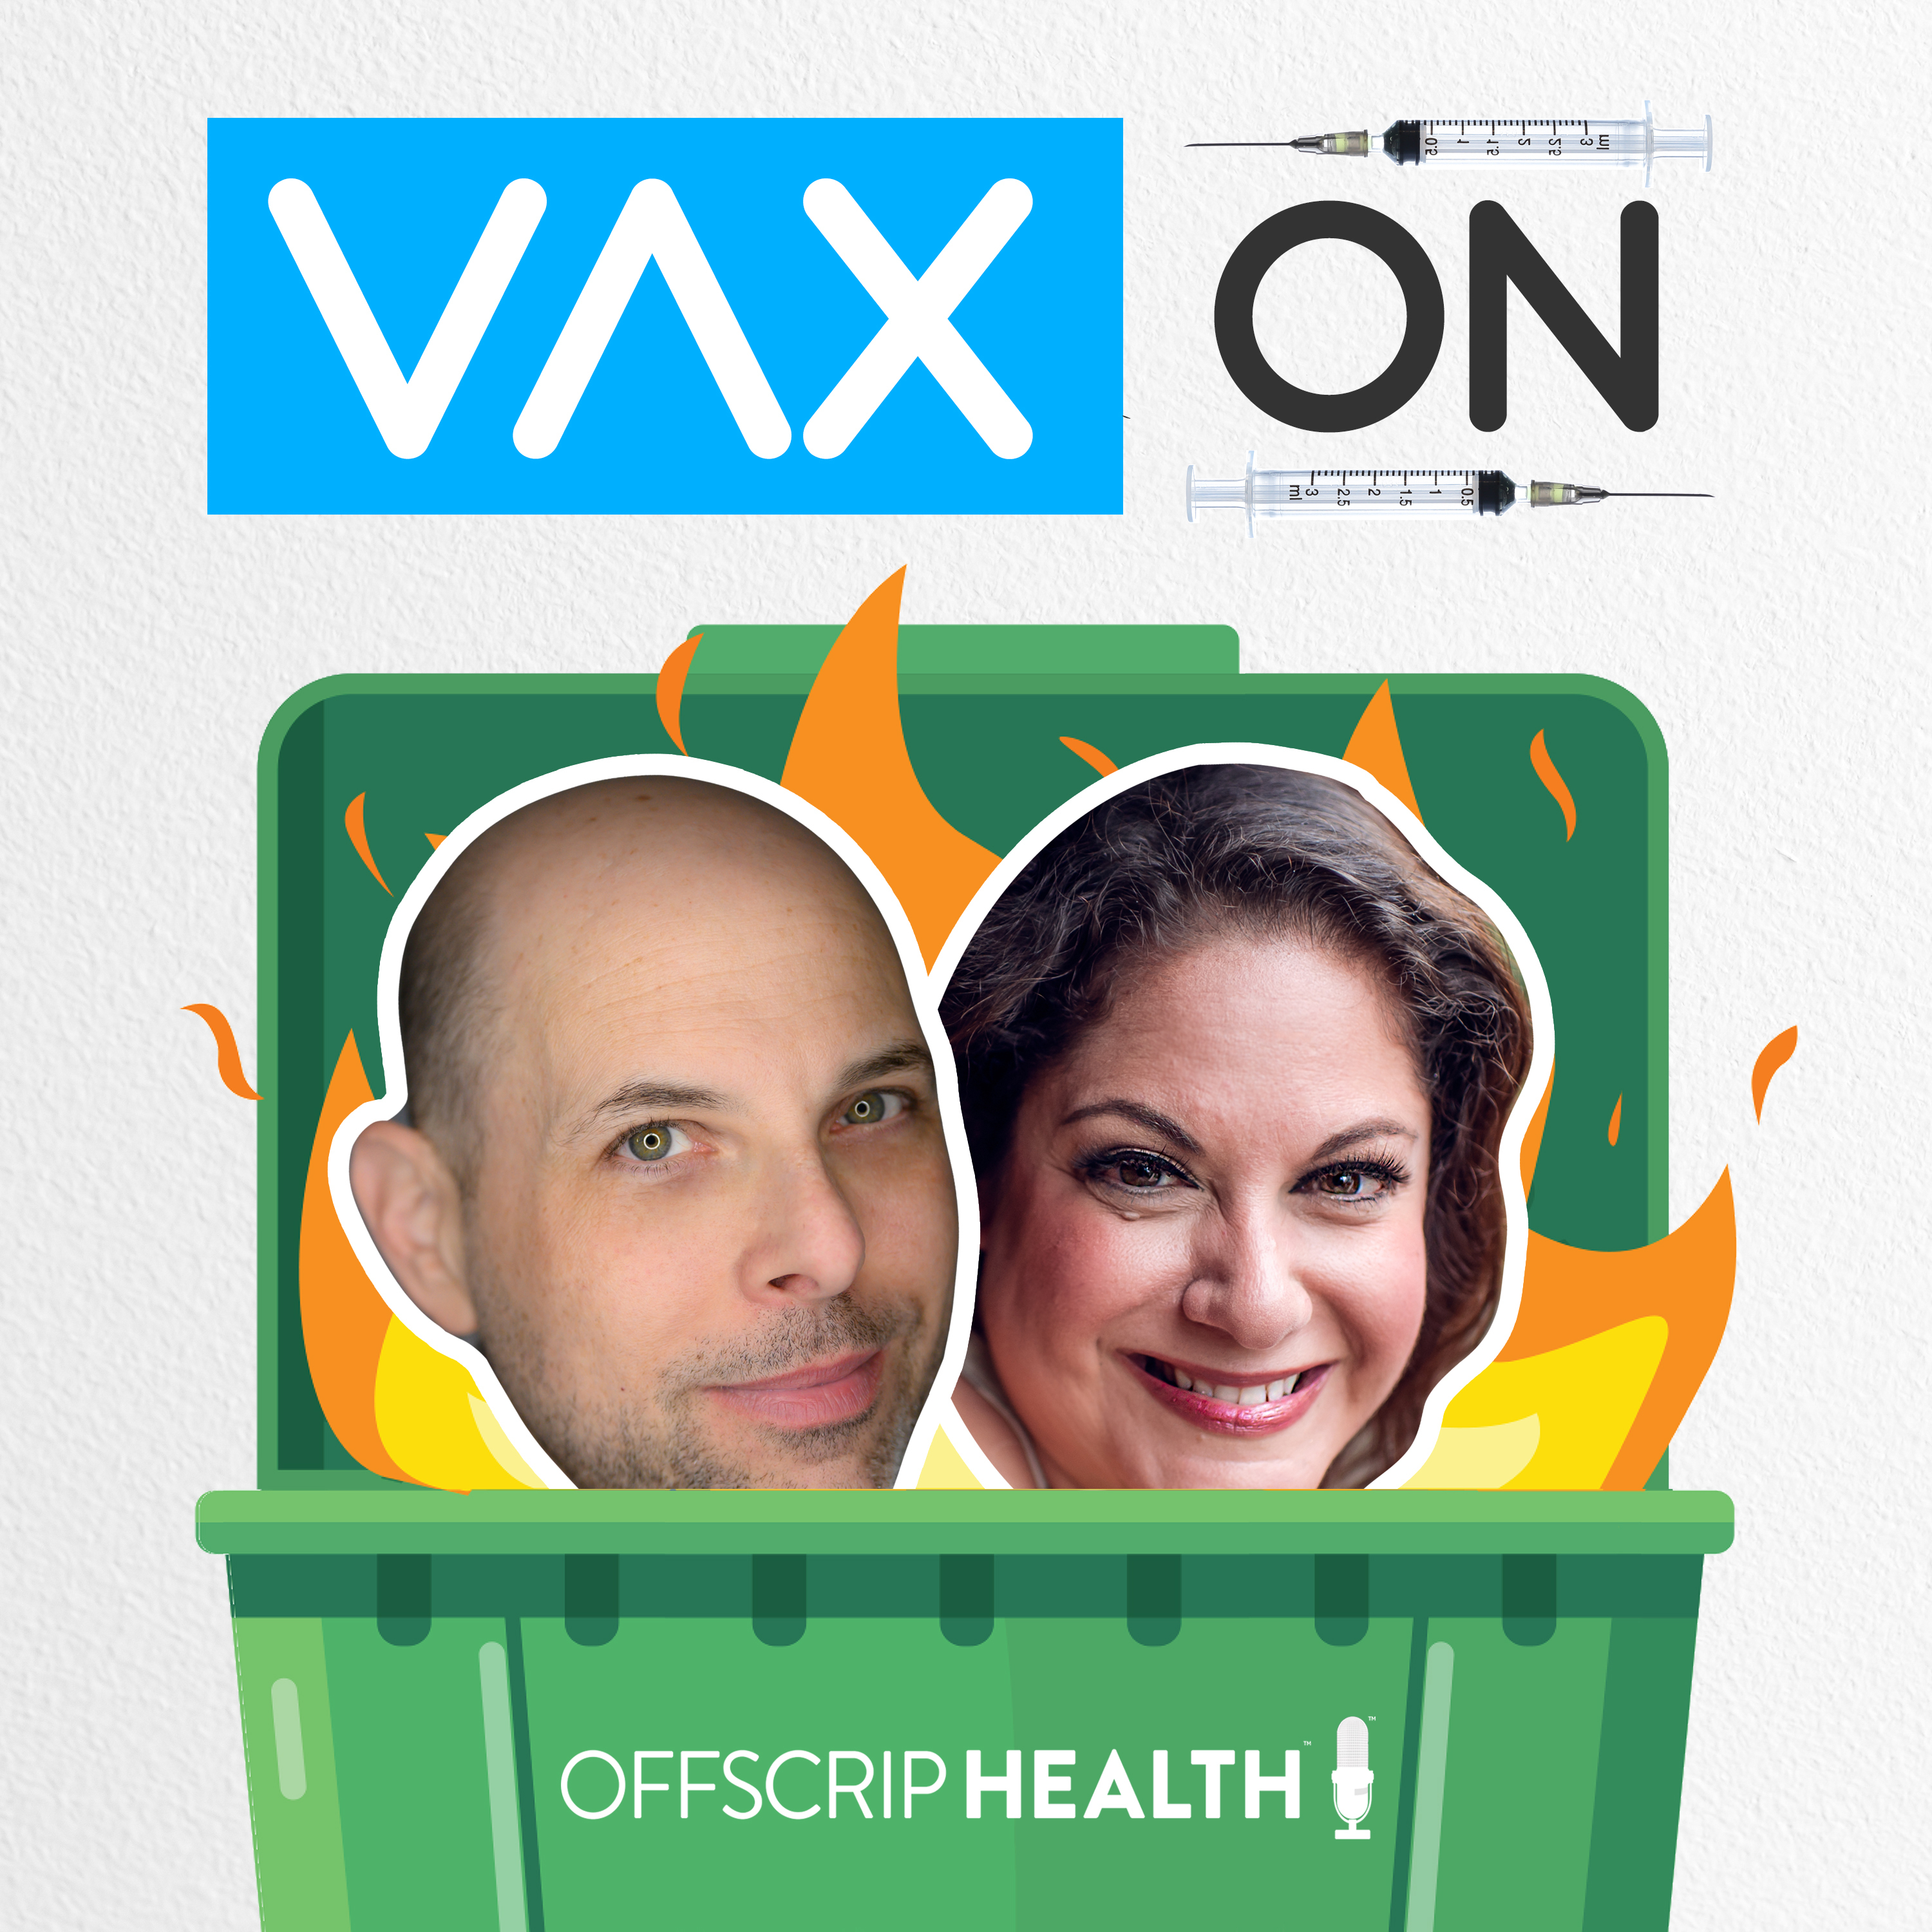 Ms. Information and GMHC Get Their Vax On!